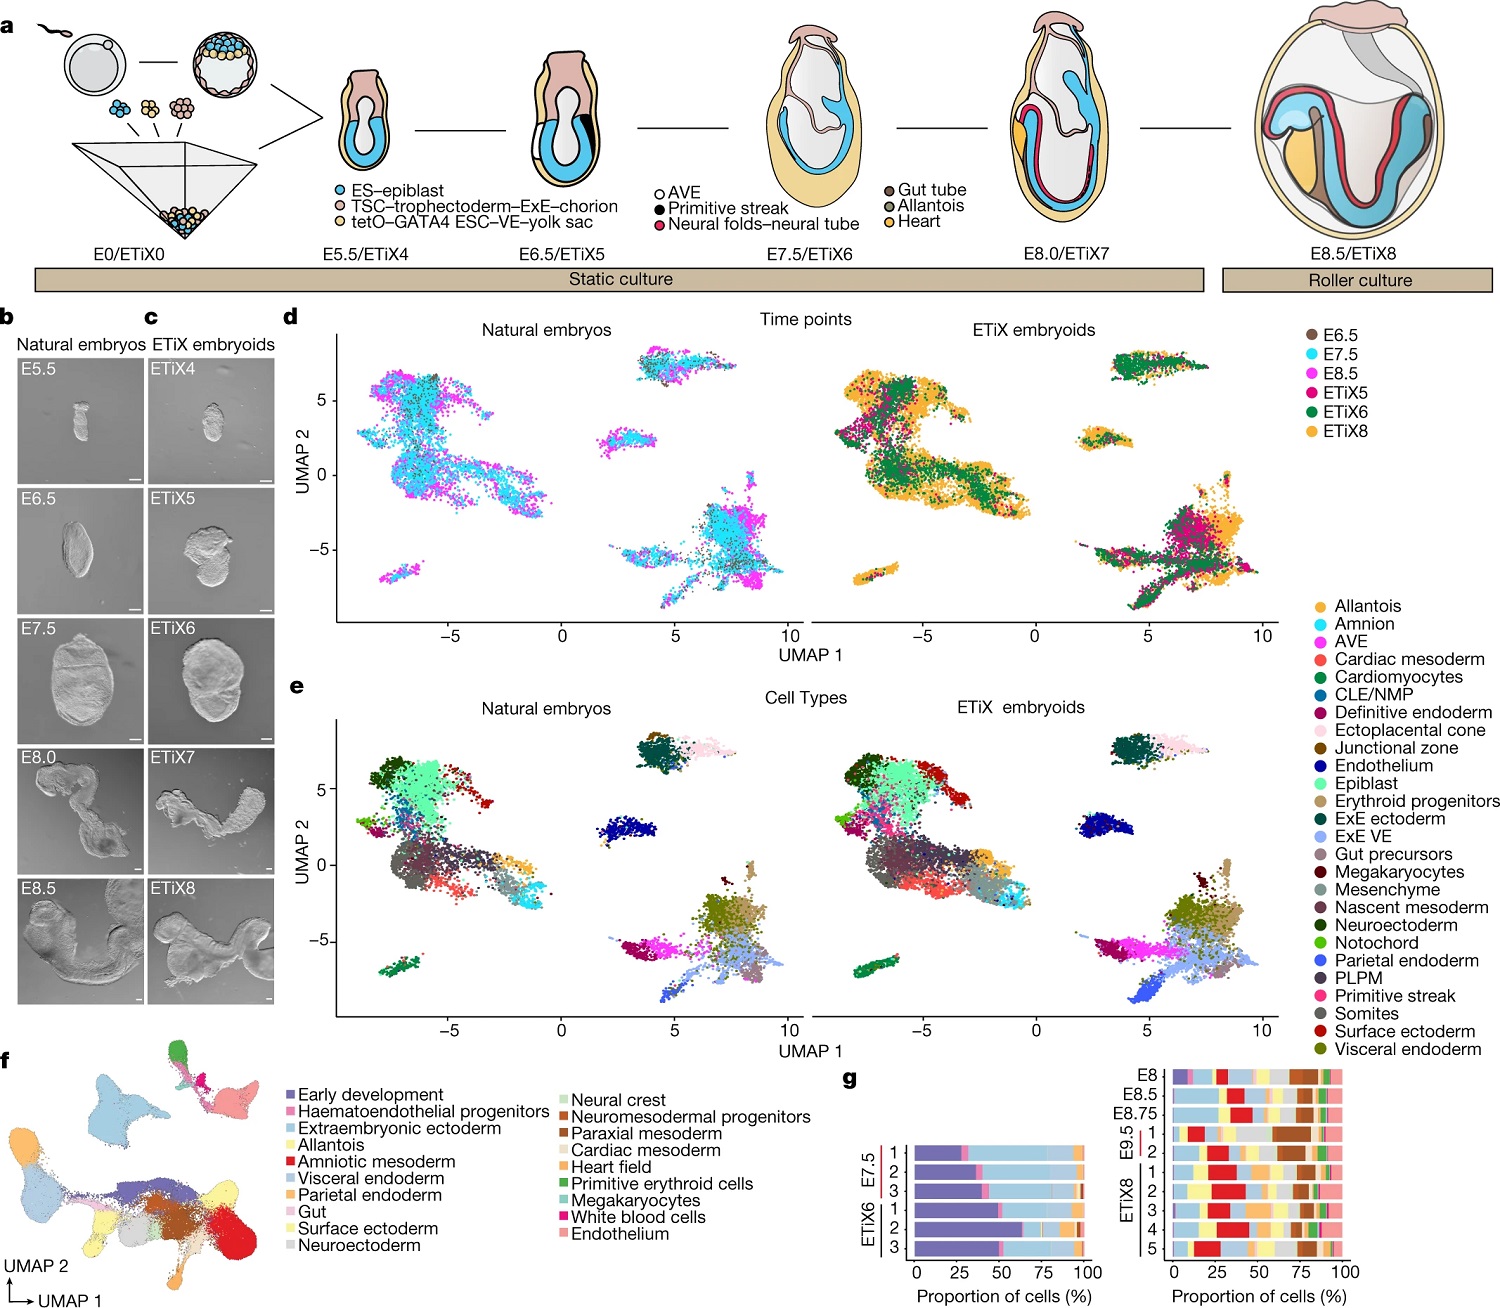 ETiX embryoids recapitulate developmental milestones of the natural mouse embryo up to E8.5